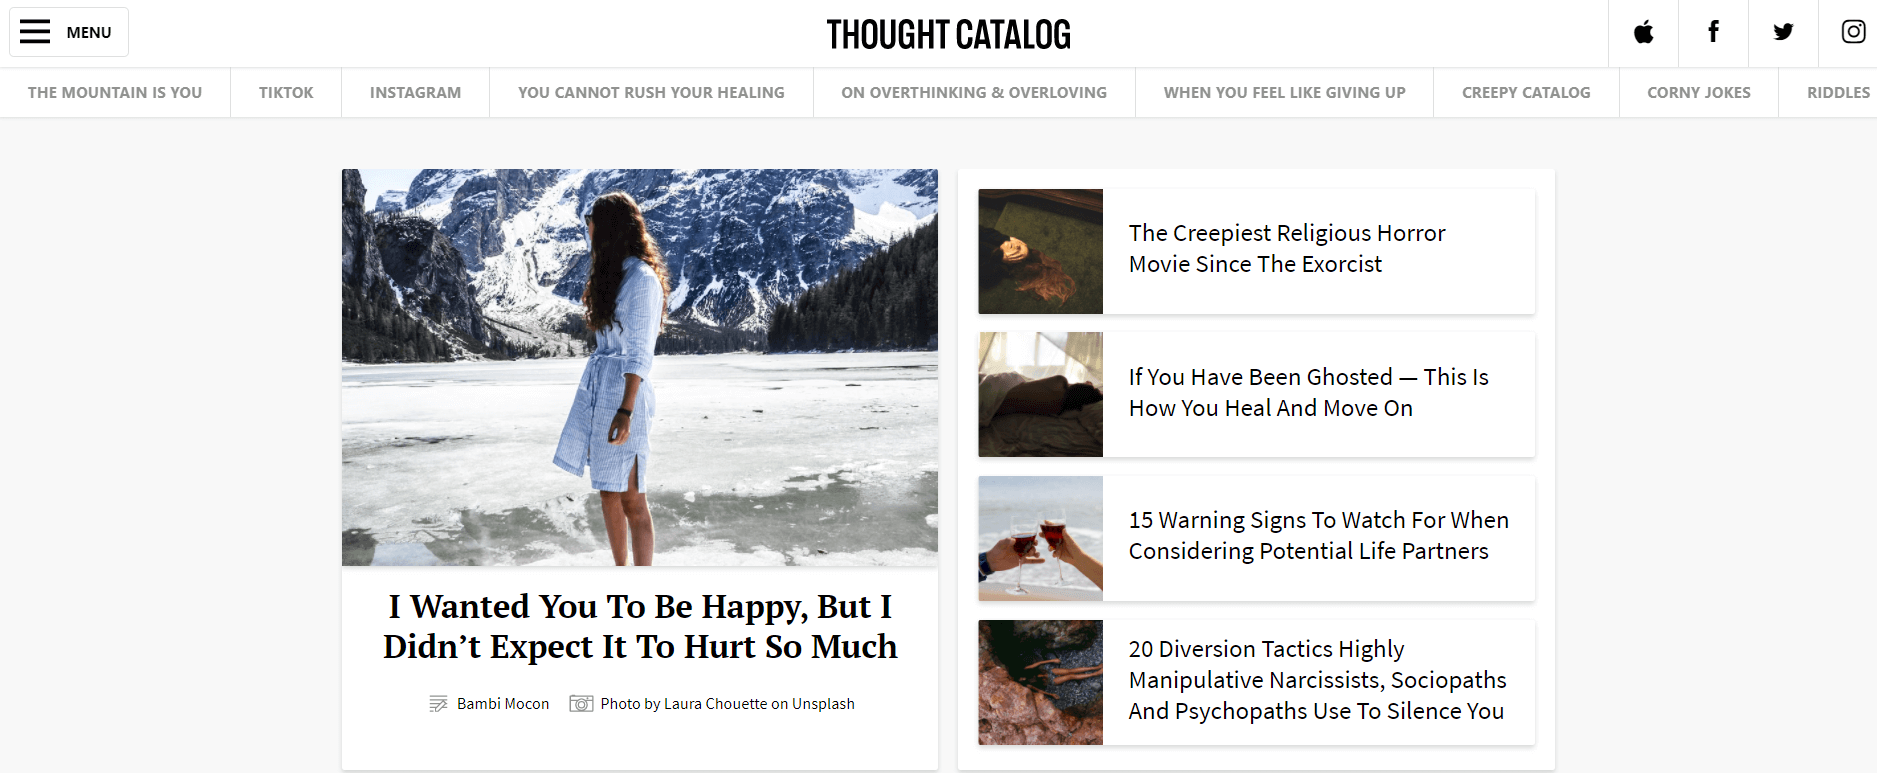 Thought Catalog